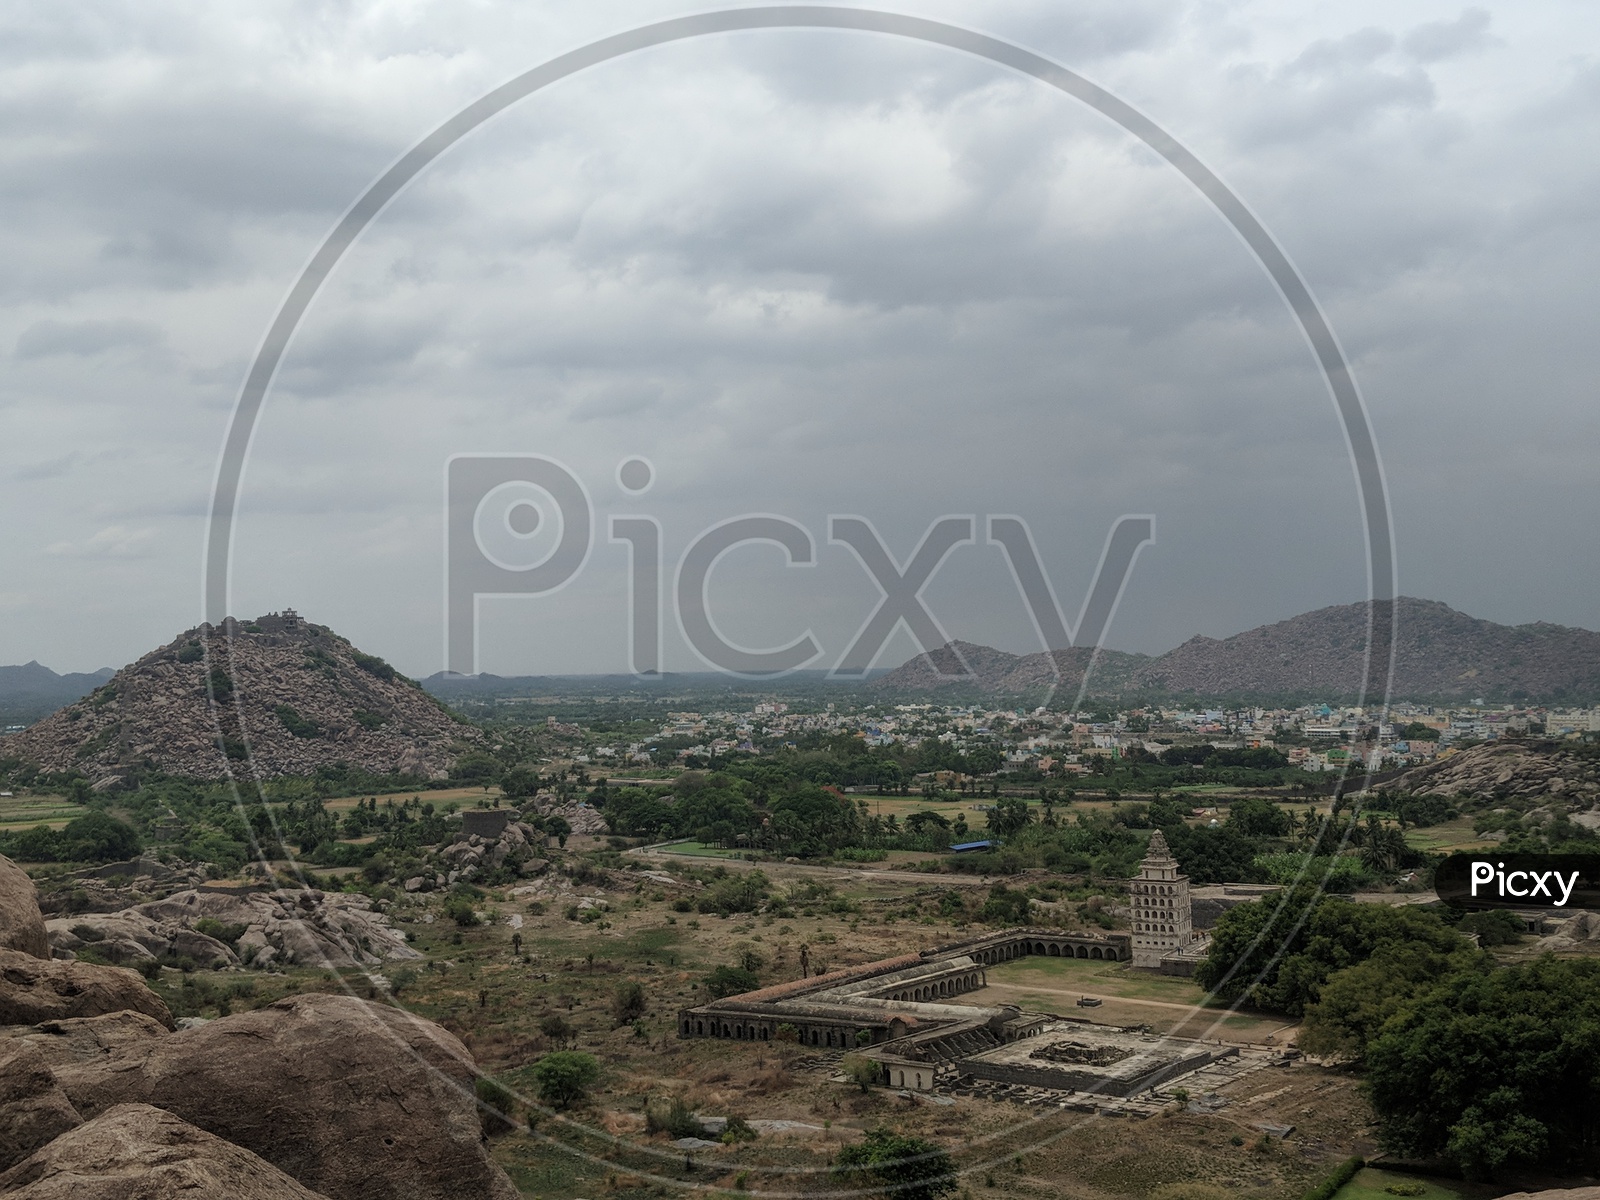 Gingee Fort